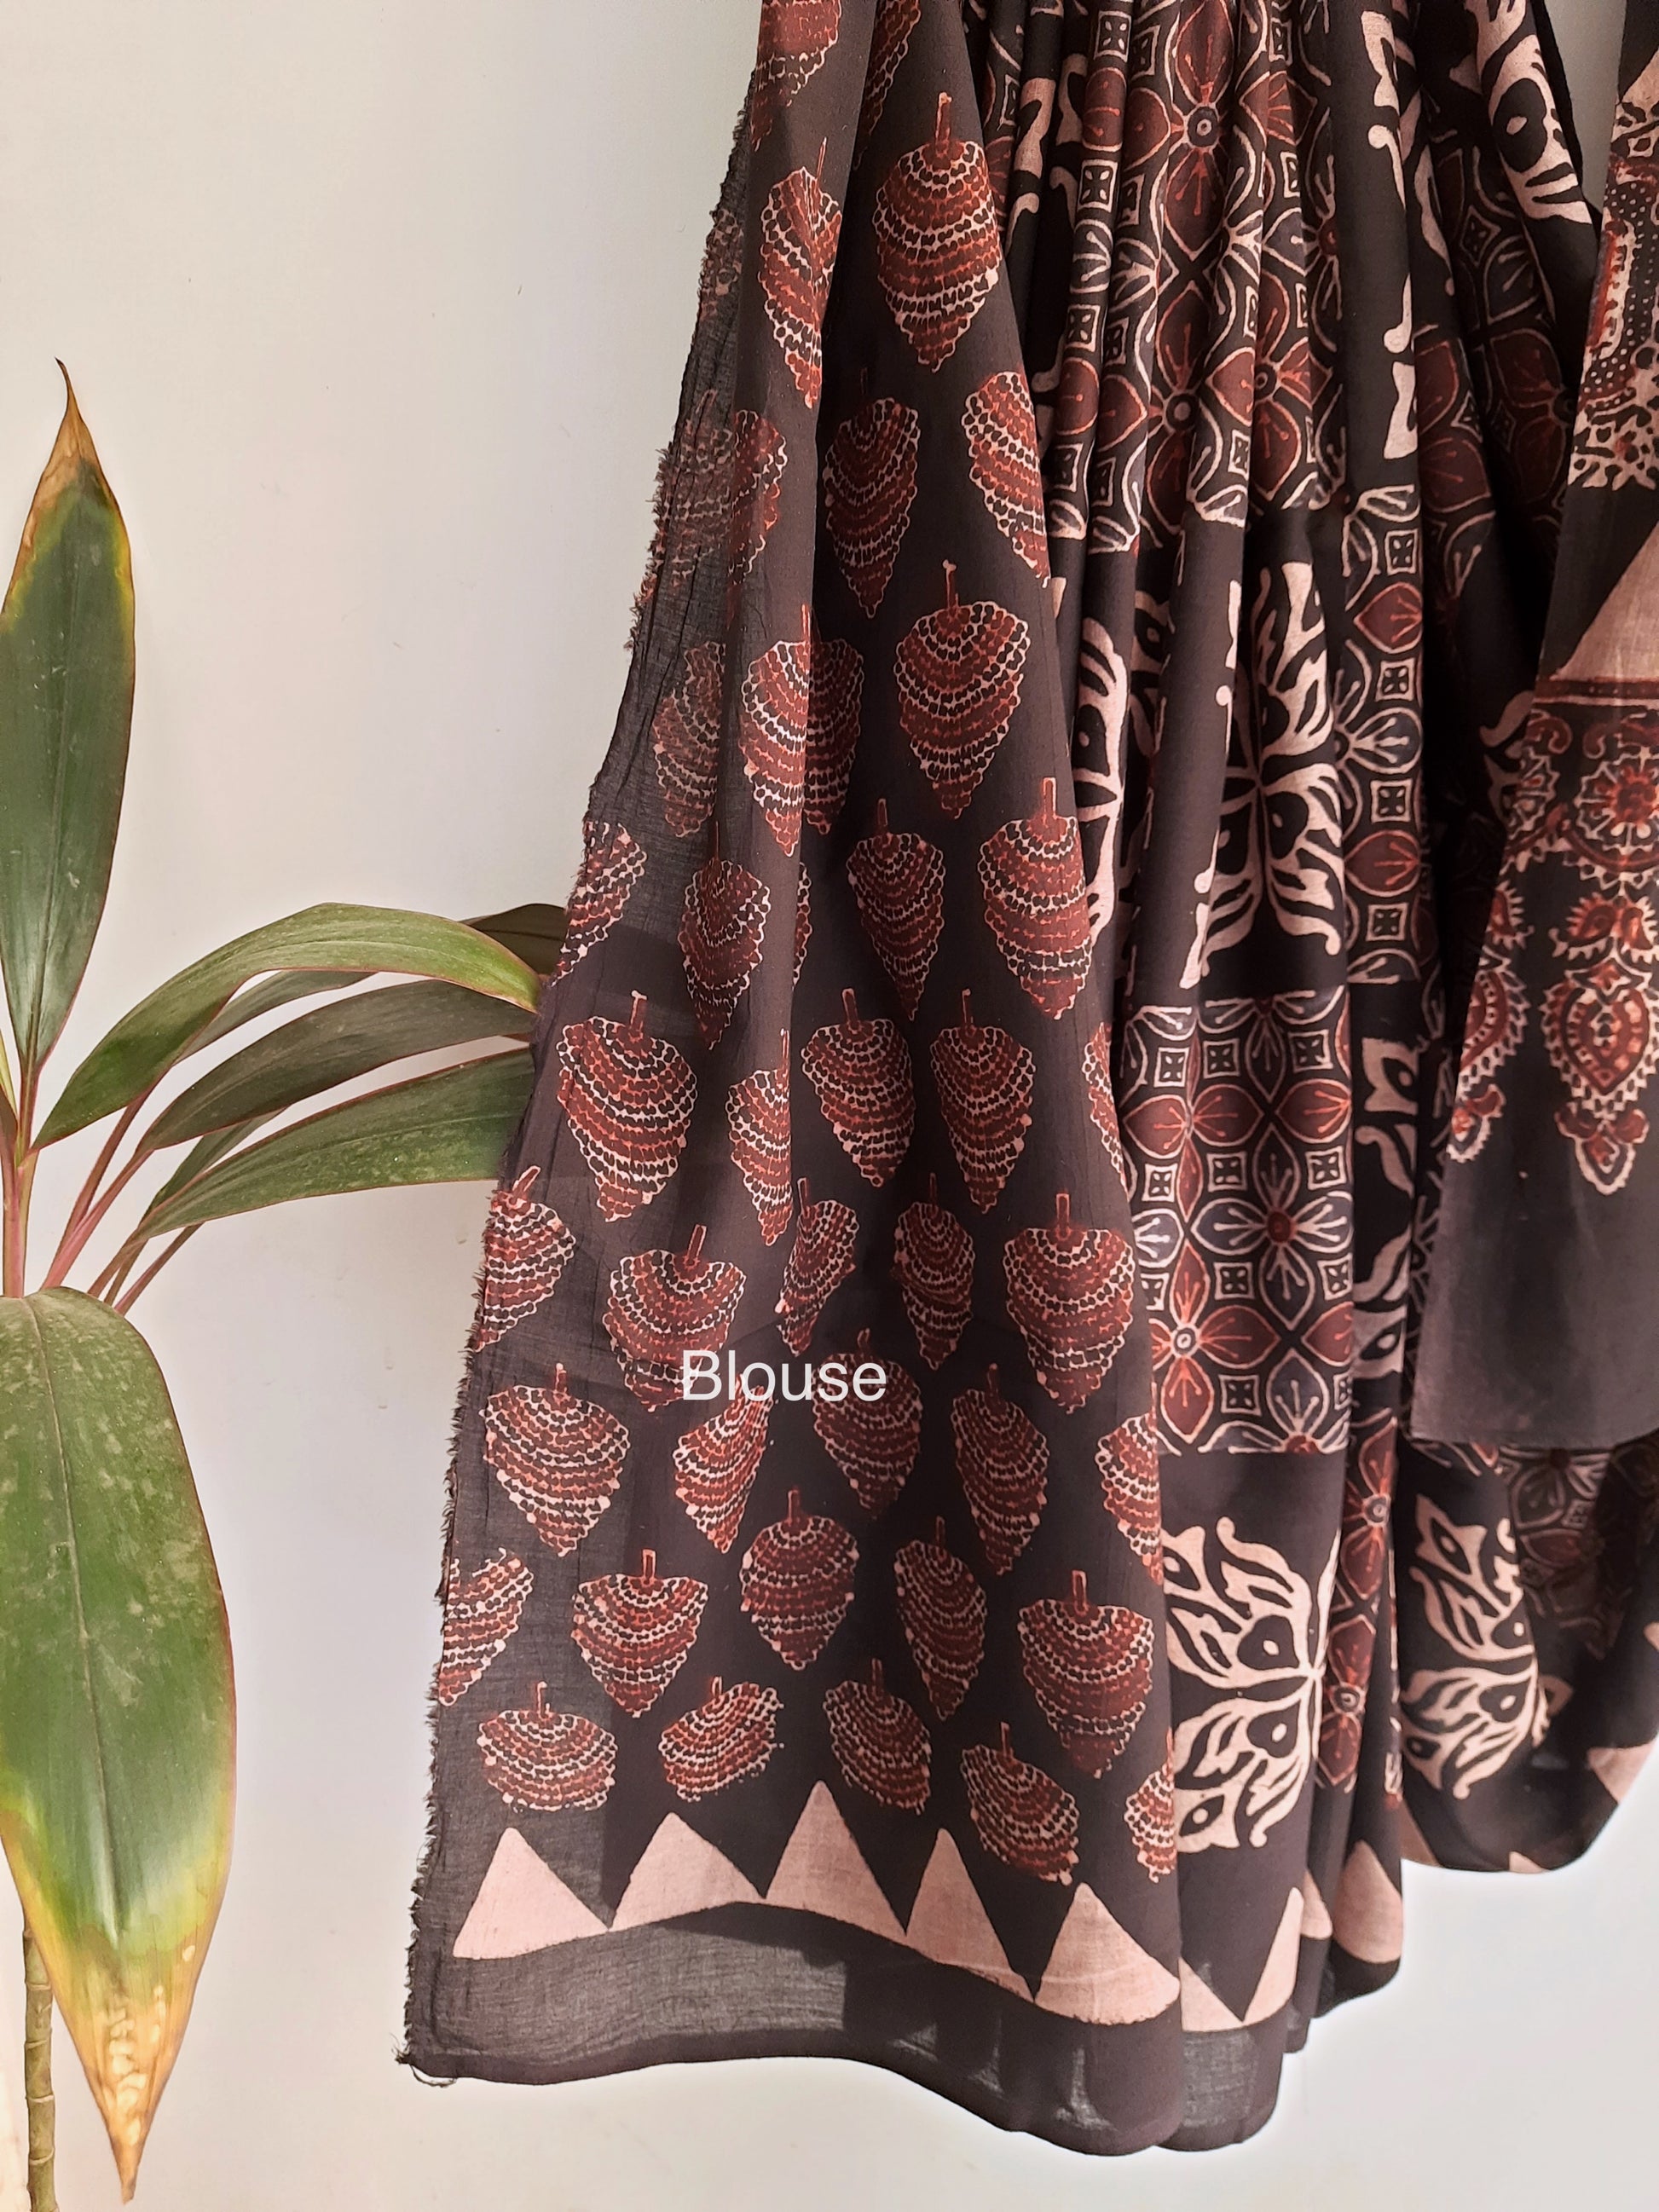 Charcoal Black Ajrakh Saree, combining artisanal expertise with natural dyes and hand block printing. Made from pure cotton, it offers both style and comfort. Slow made and conscious, it's a tasteful addition to your collection. Includes a running blouse for a complete, luxurious look.